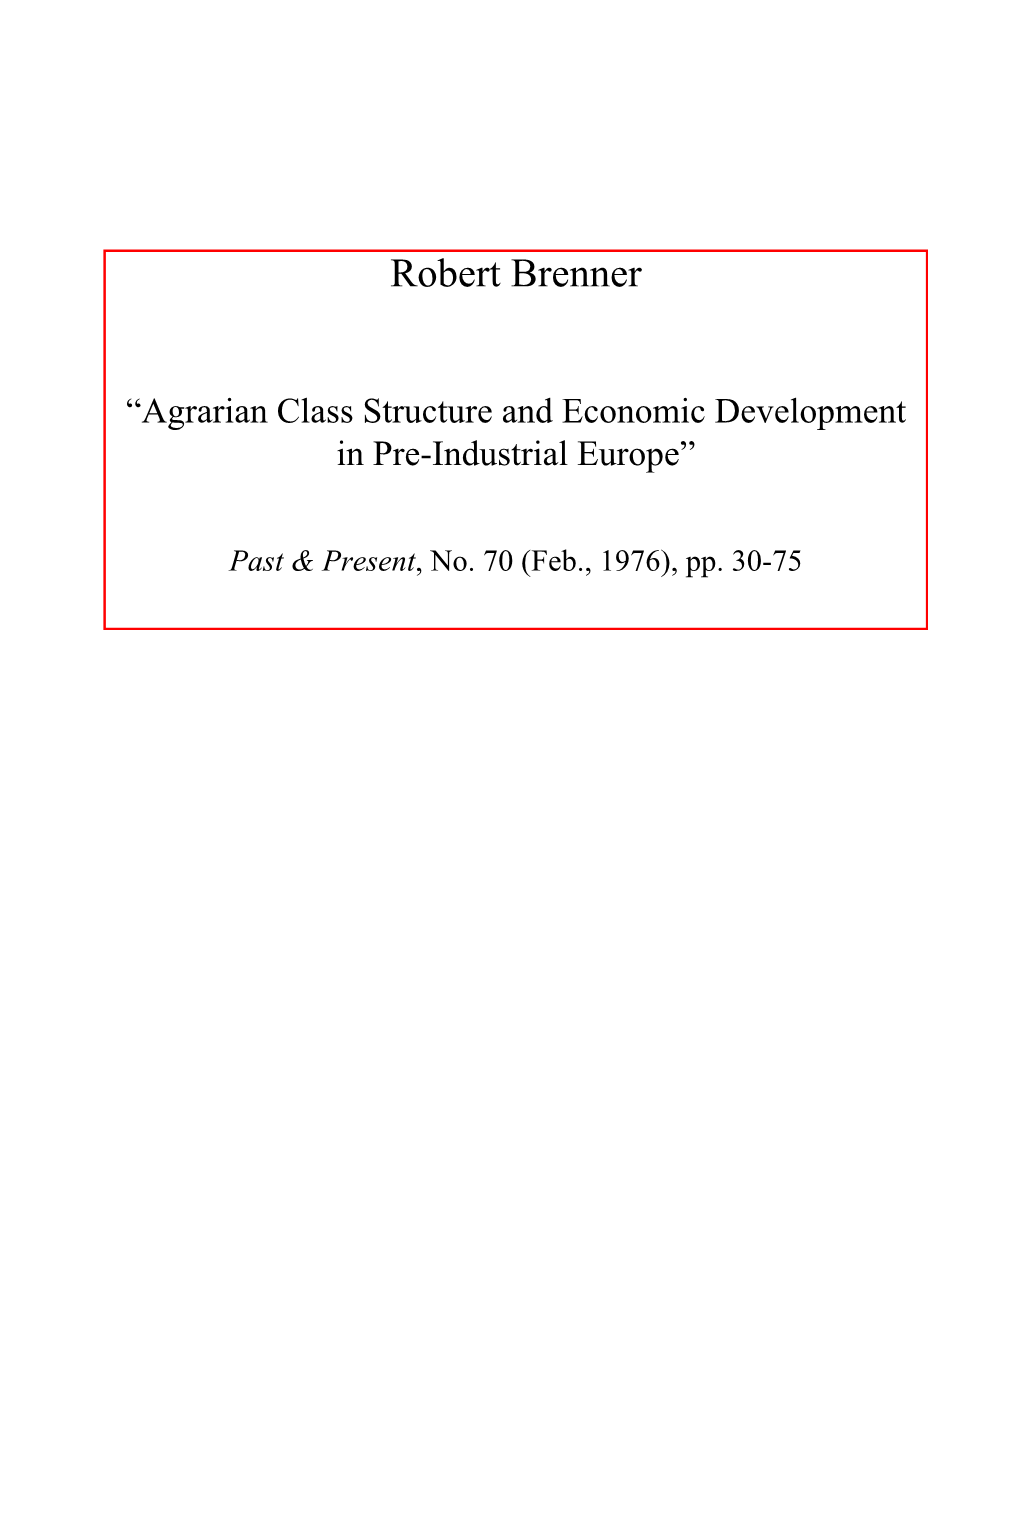 Agrarian Class Structure and Economic Development in Pre